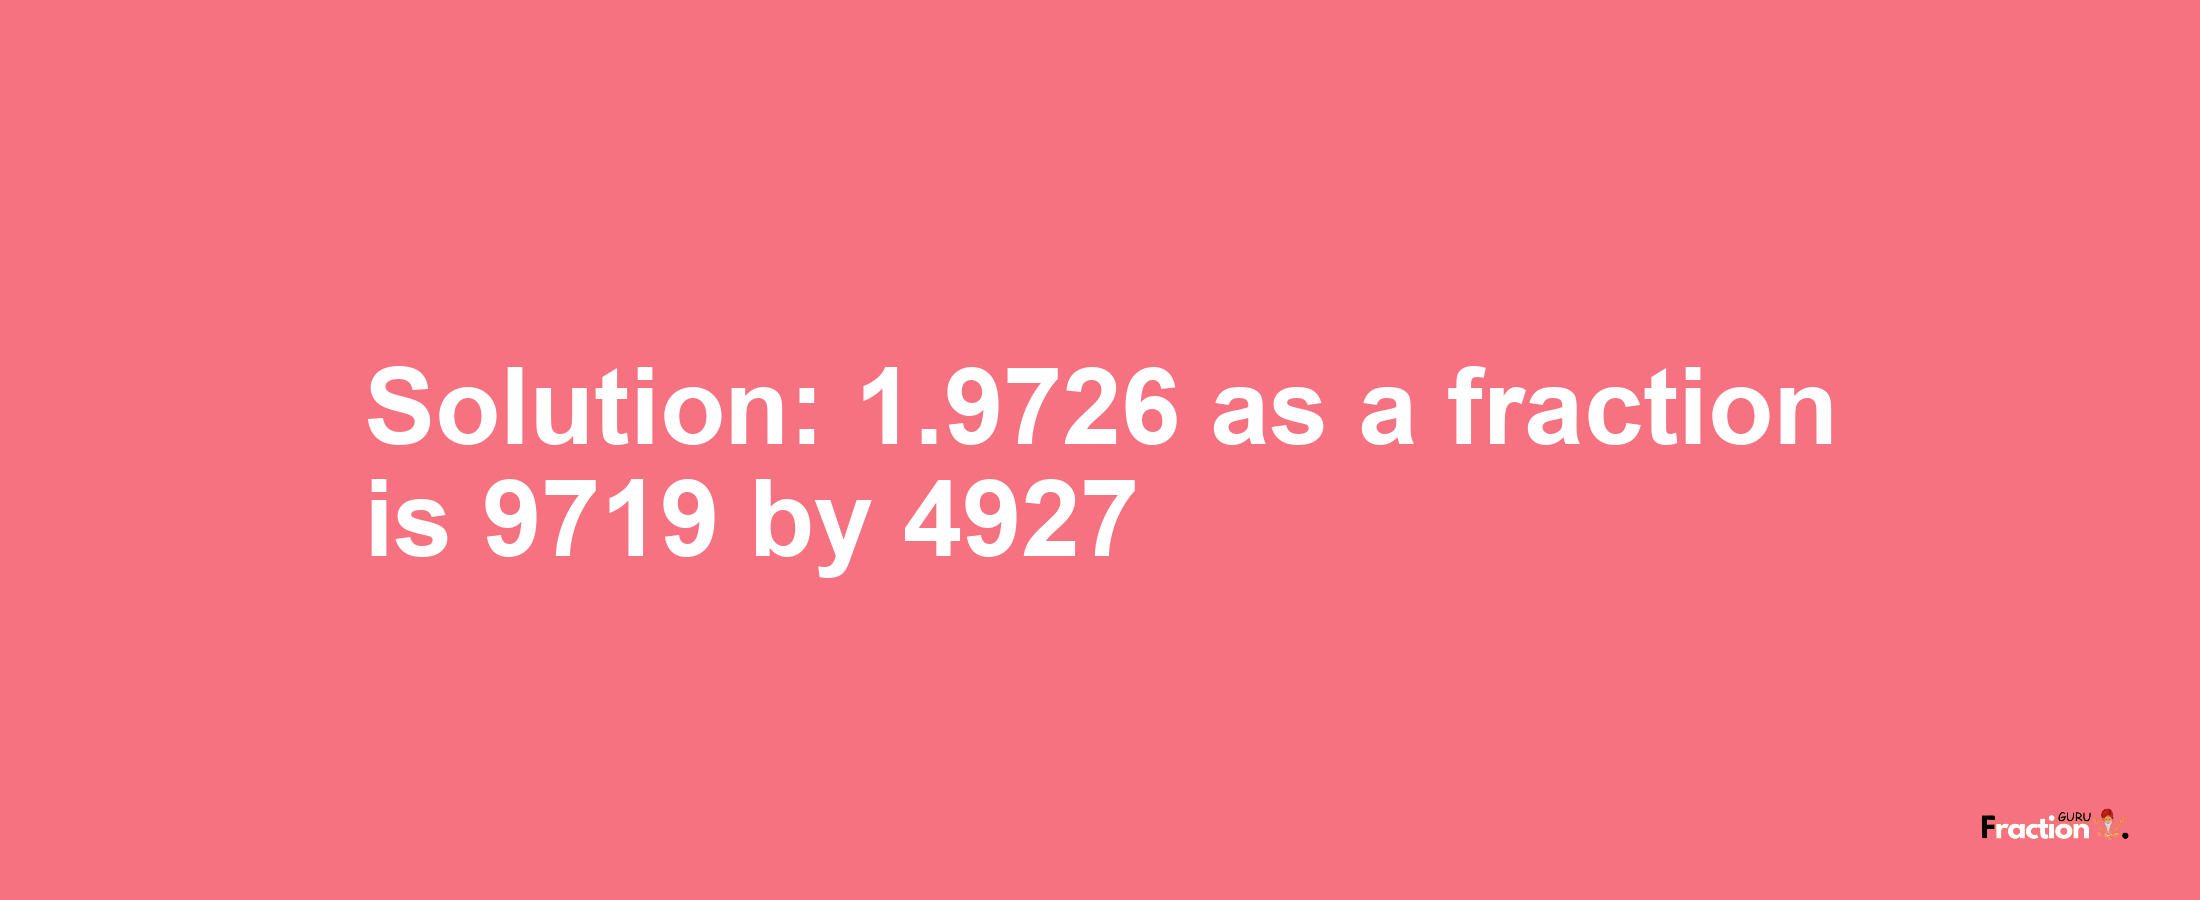 Solution:1.9726 as a fraction is 9719/4927